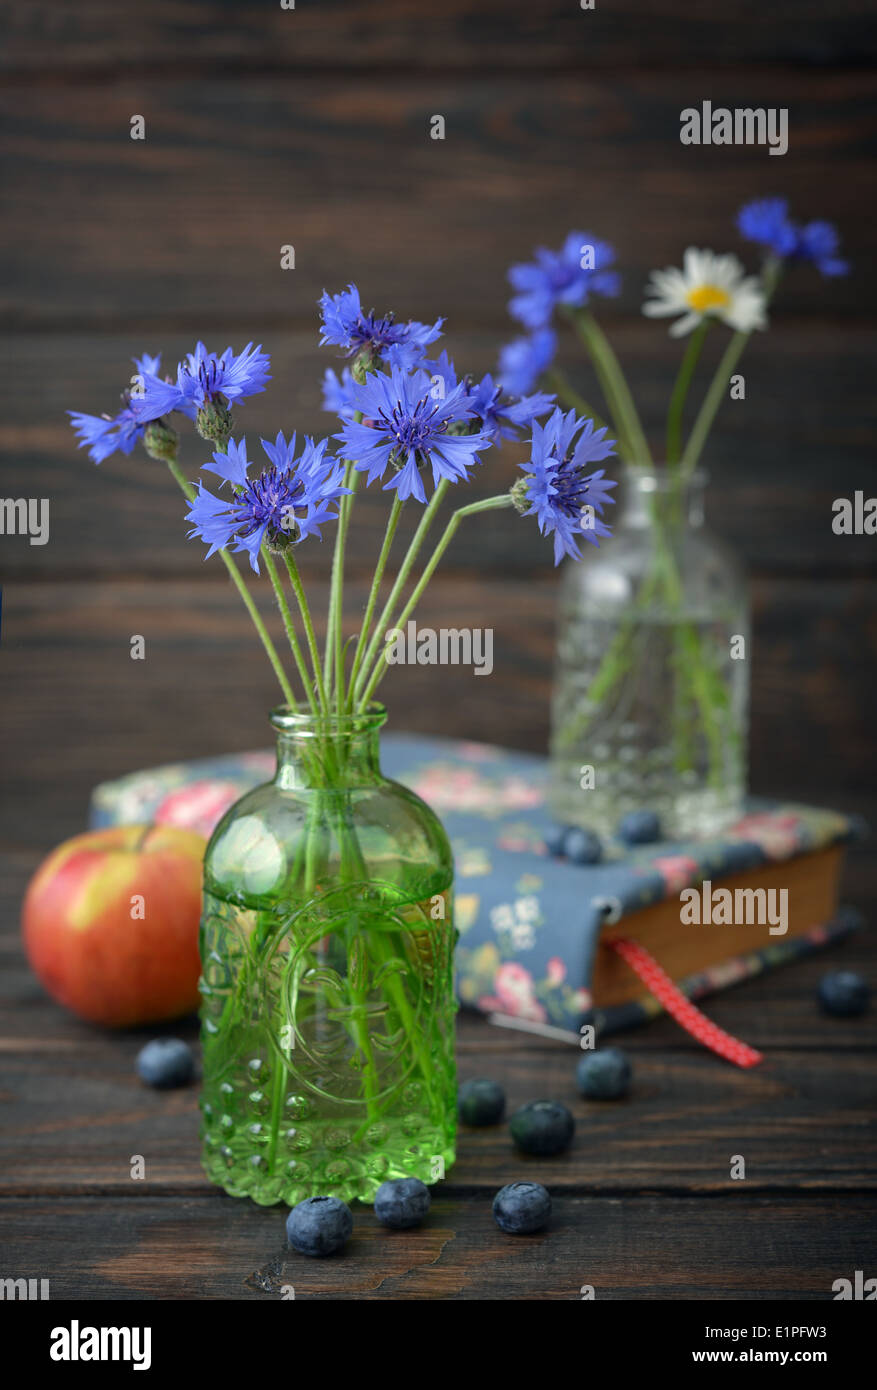 Cornflowers in vintage bottle with berries on wooden background Stock Photo